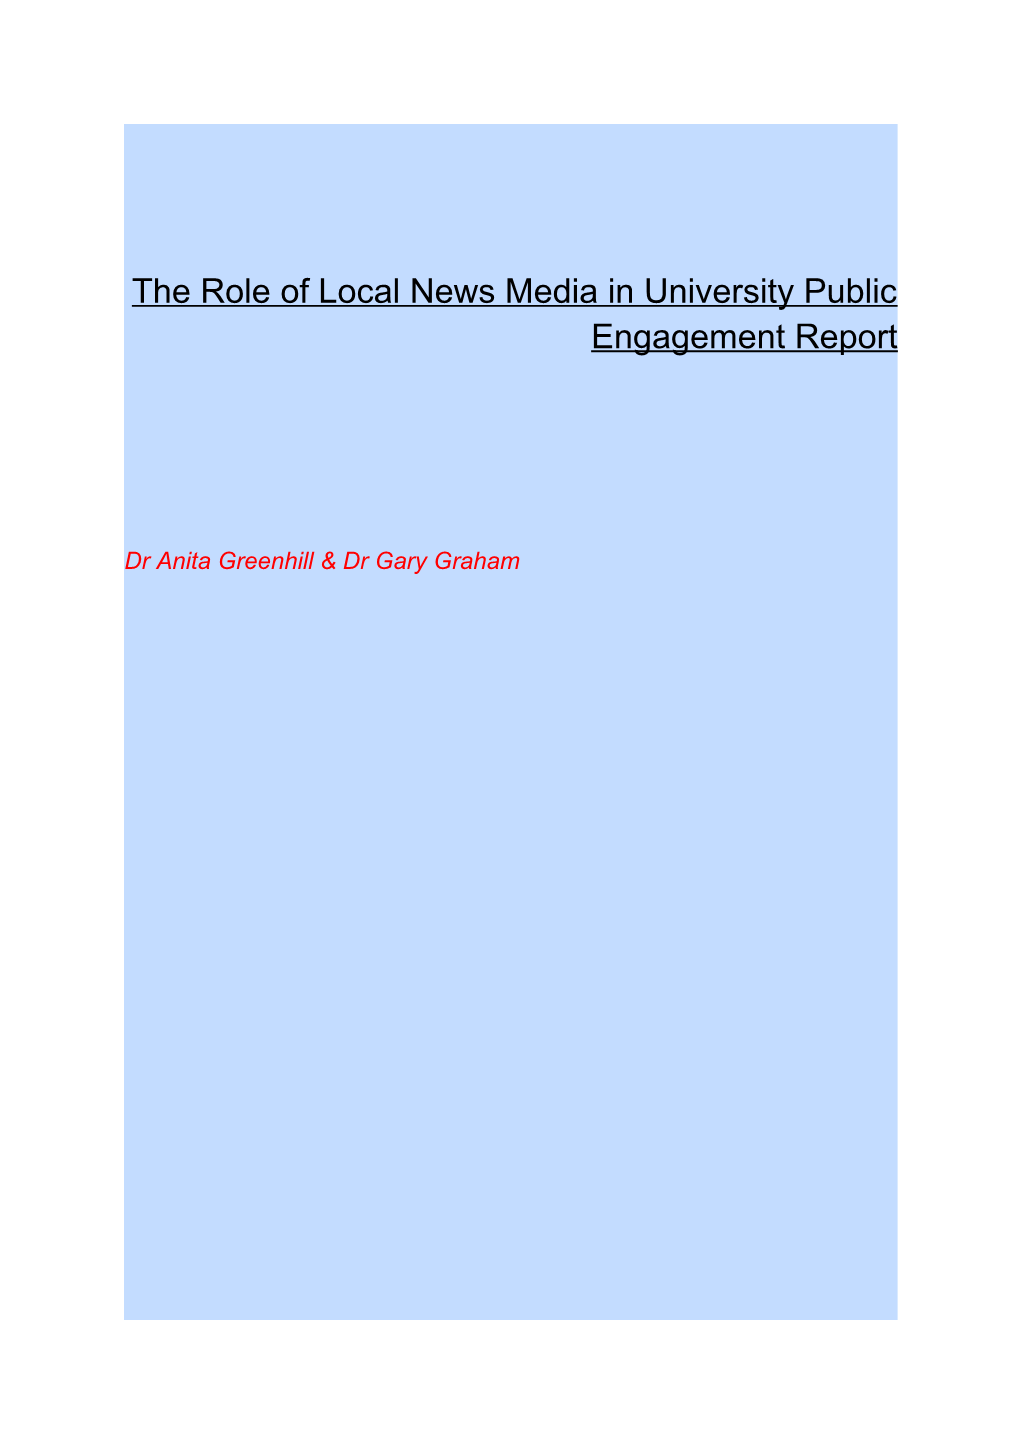 The Role of Local News Media in University Public Engagement Report